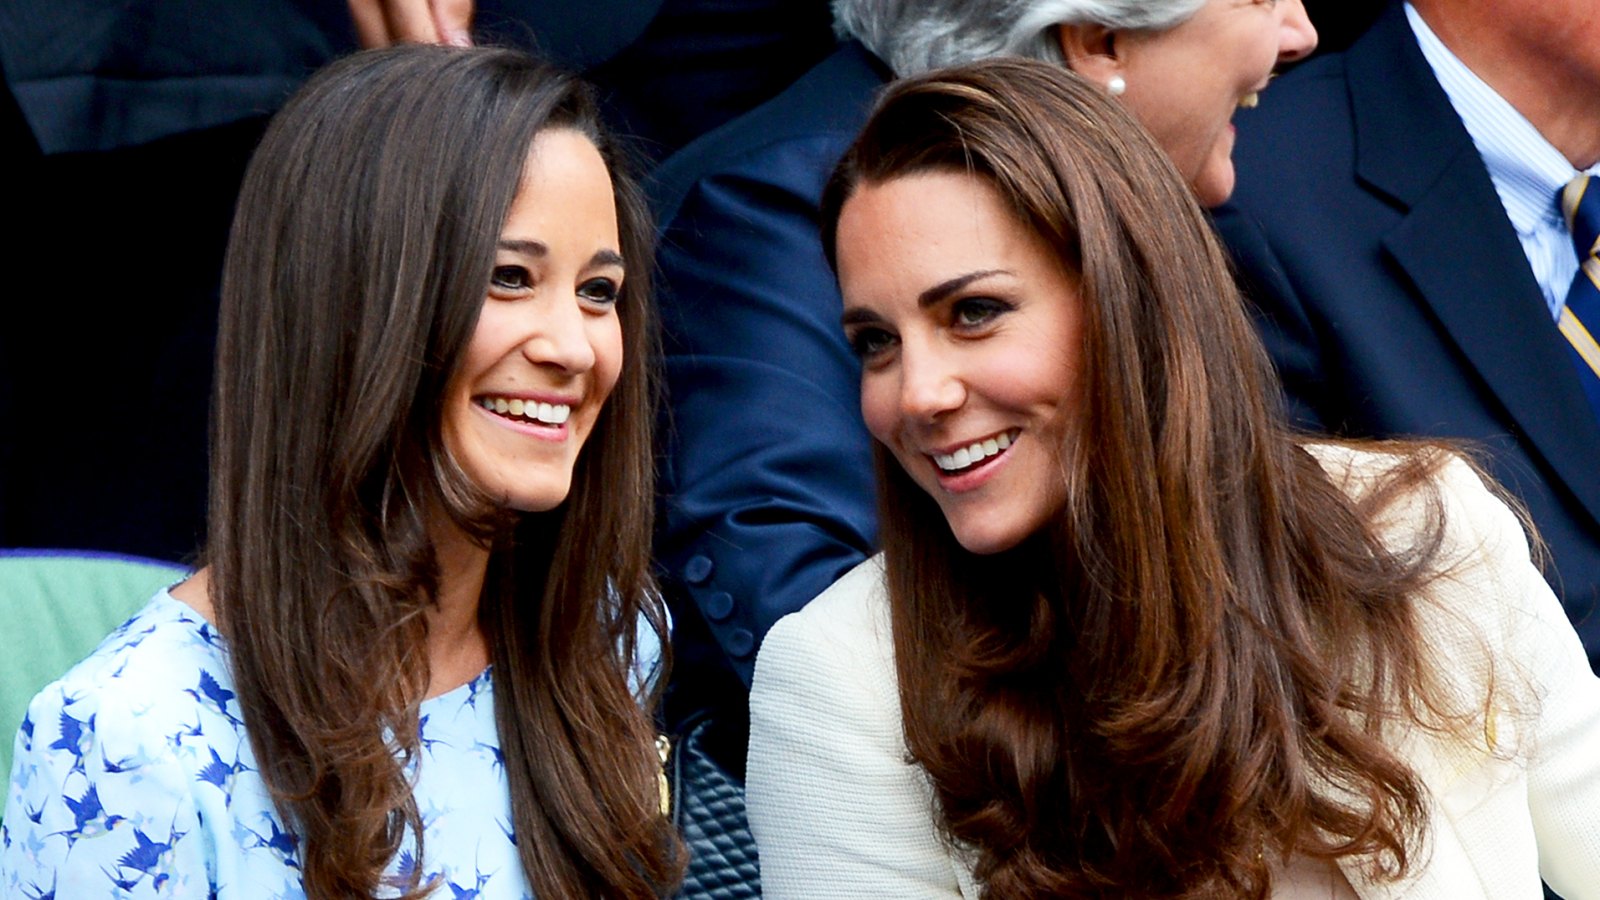 Pippa Middleton and Kate Middleton in the Royal Box on Centre Court during the 2012 Wimbledon Championships tennis tournament at the All England Tennis Club in Wimbledon, London.